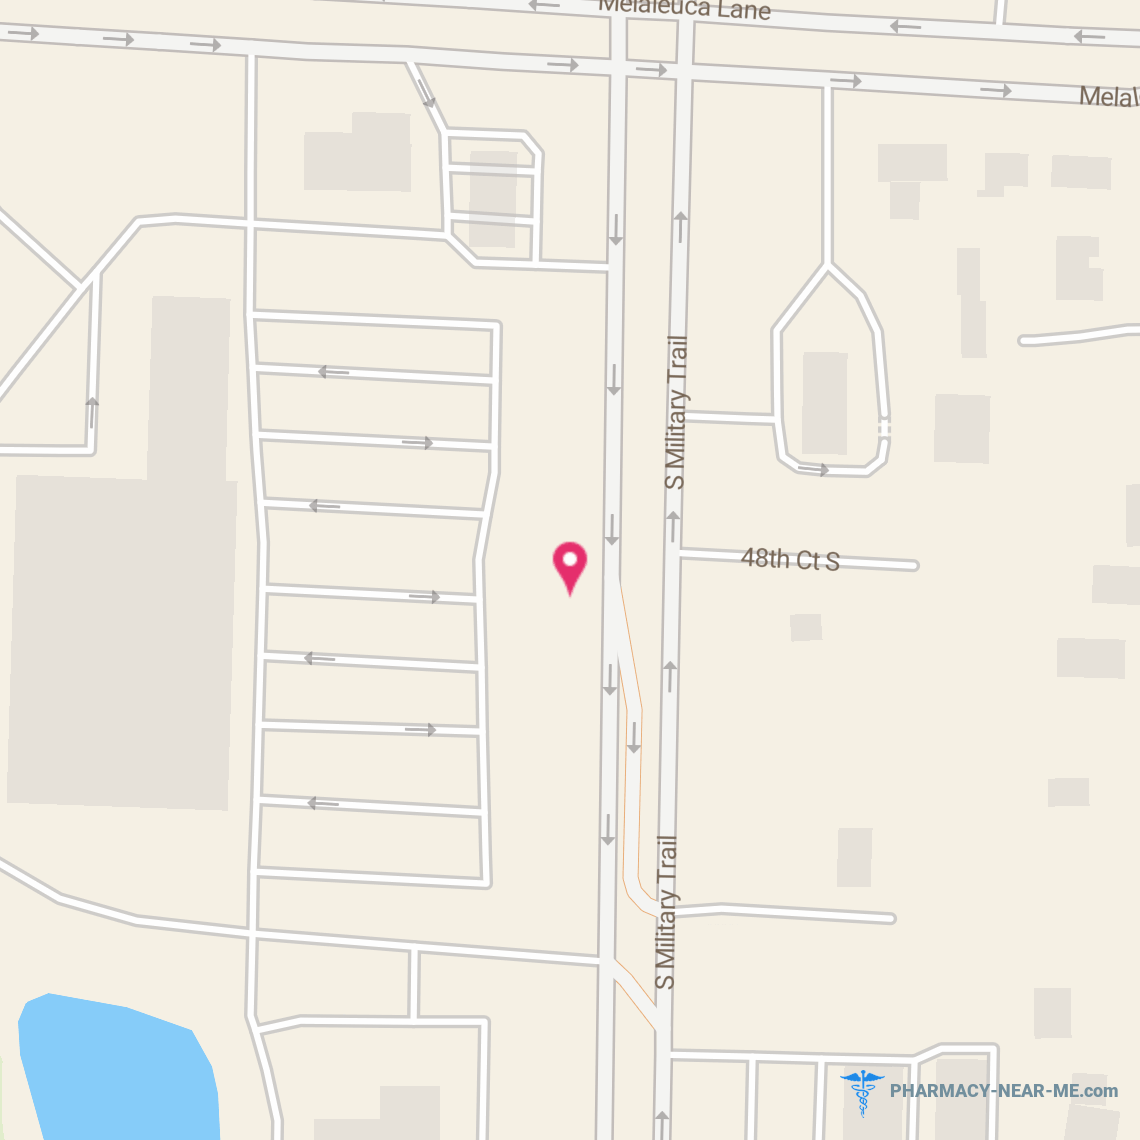 PUBLIX PHARMACY #0895 - Pharmacy Hours, Phone, Reviews & Information: 4849 South Military Trail, Greenacres, Florida 33463, United States